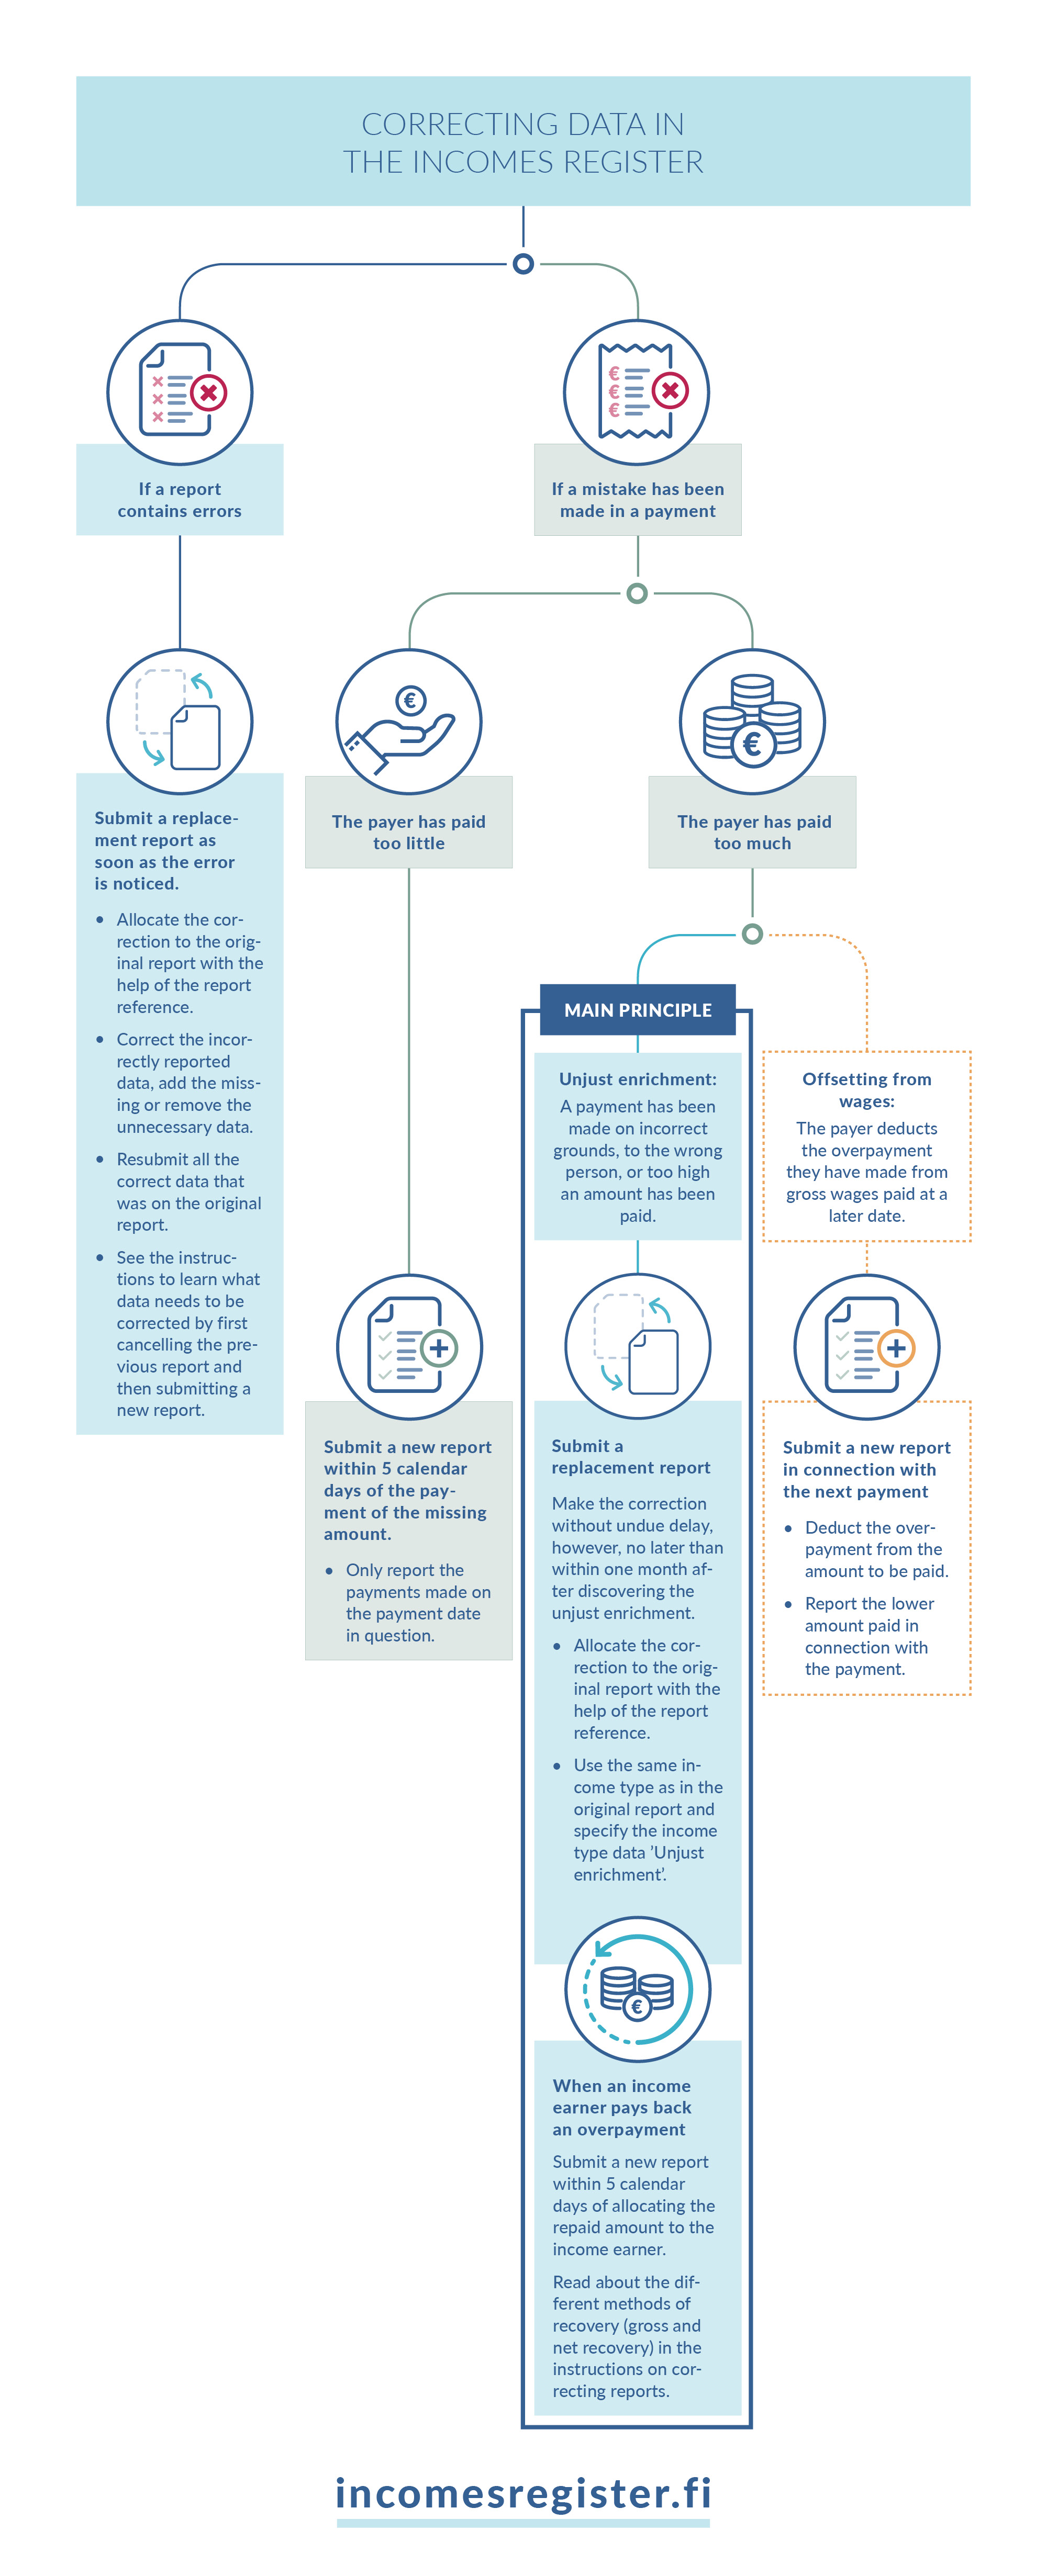 Infographic depicting how to correct earnings payment data in the Incomes Register.